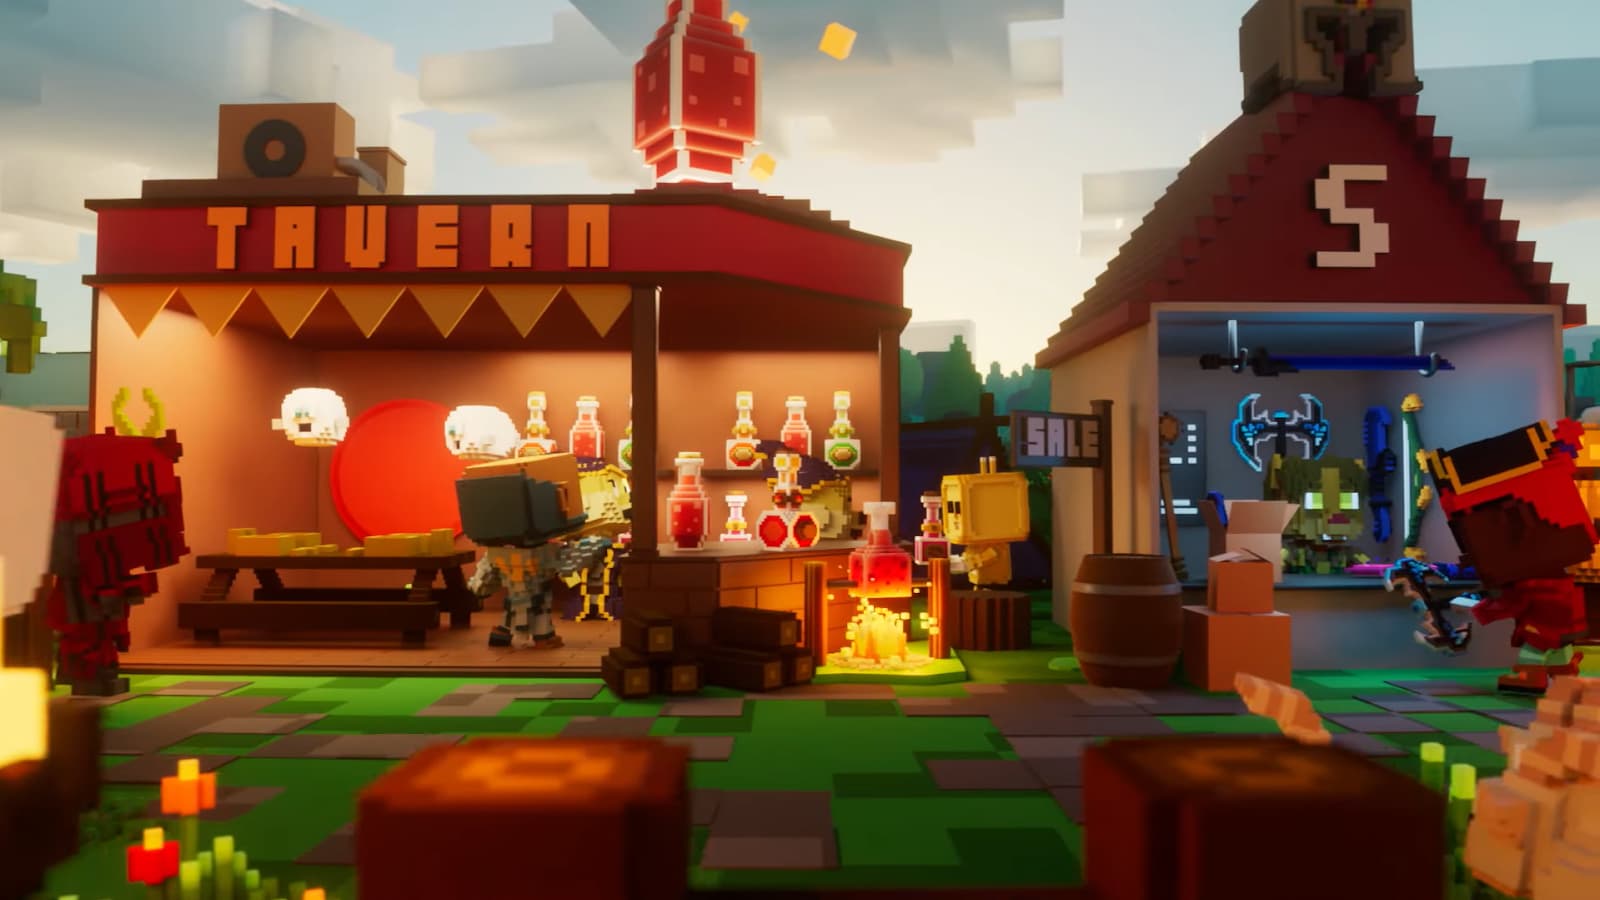 A voxel-style tavern scene with characters and detailed interior